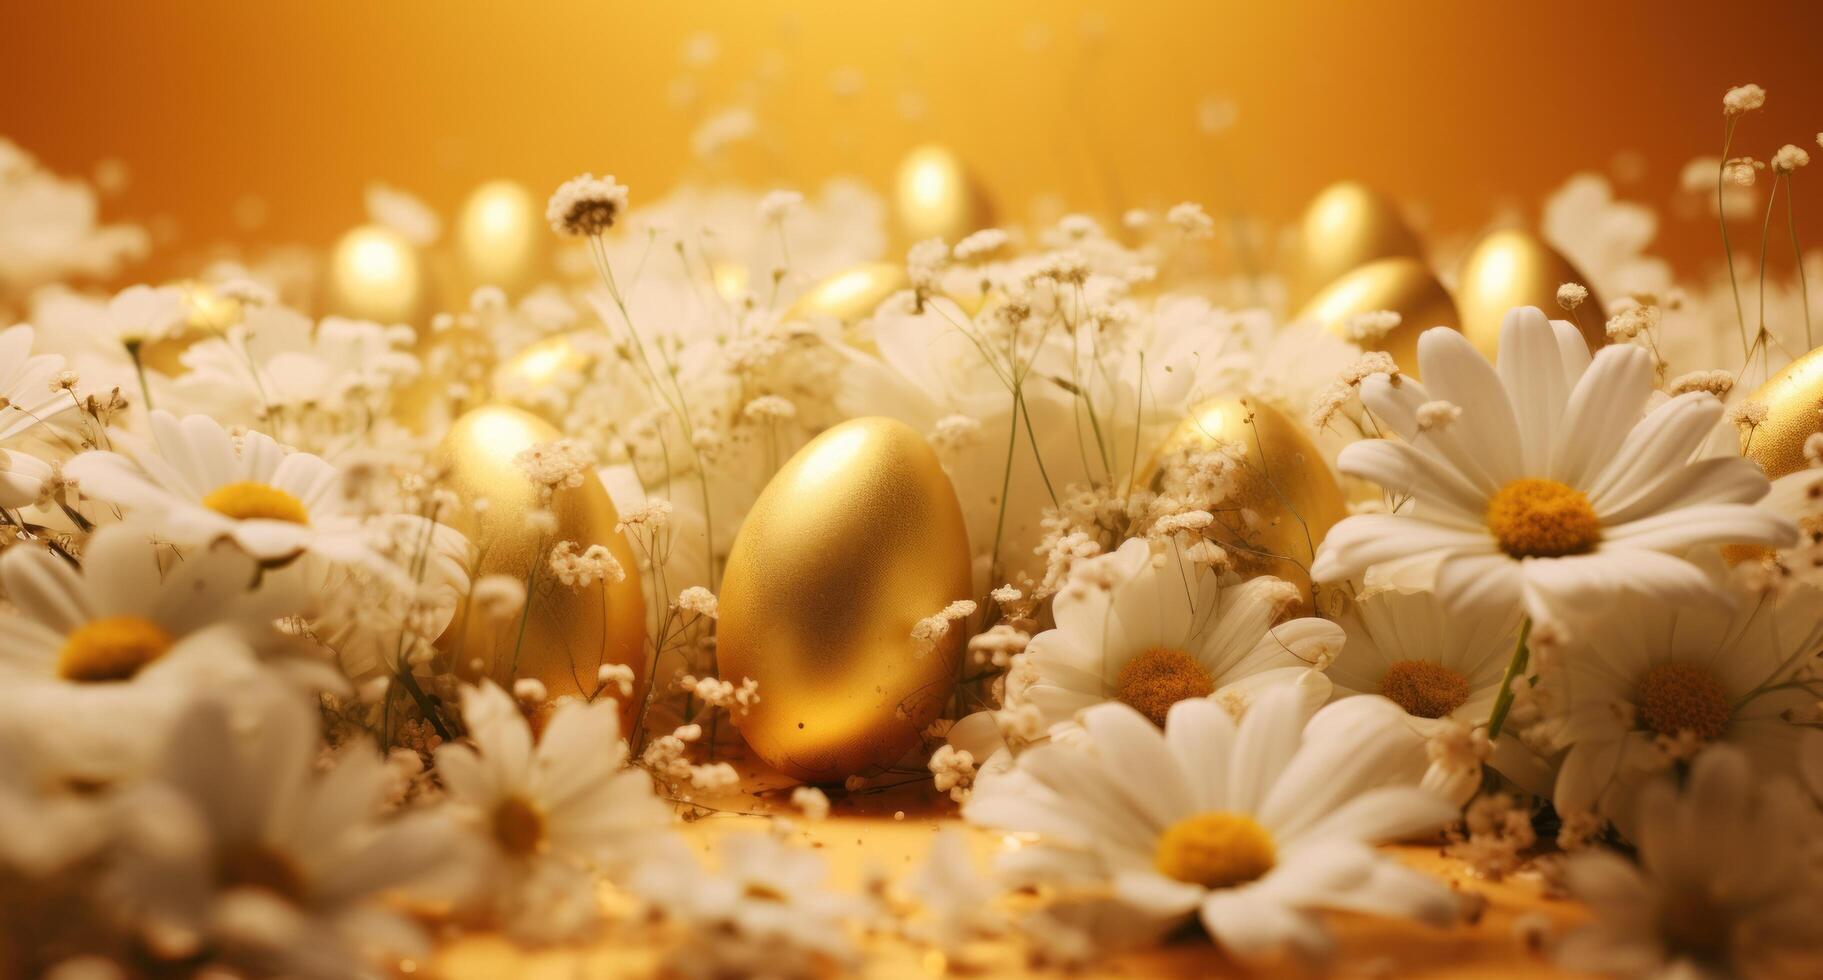 AI generated a group of golden eggs and flowers covered in glitter laying on a yellow background photo